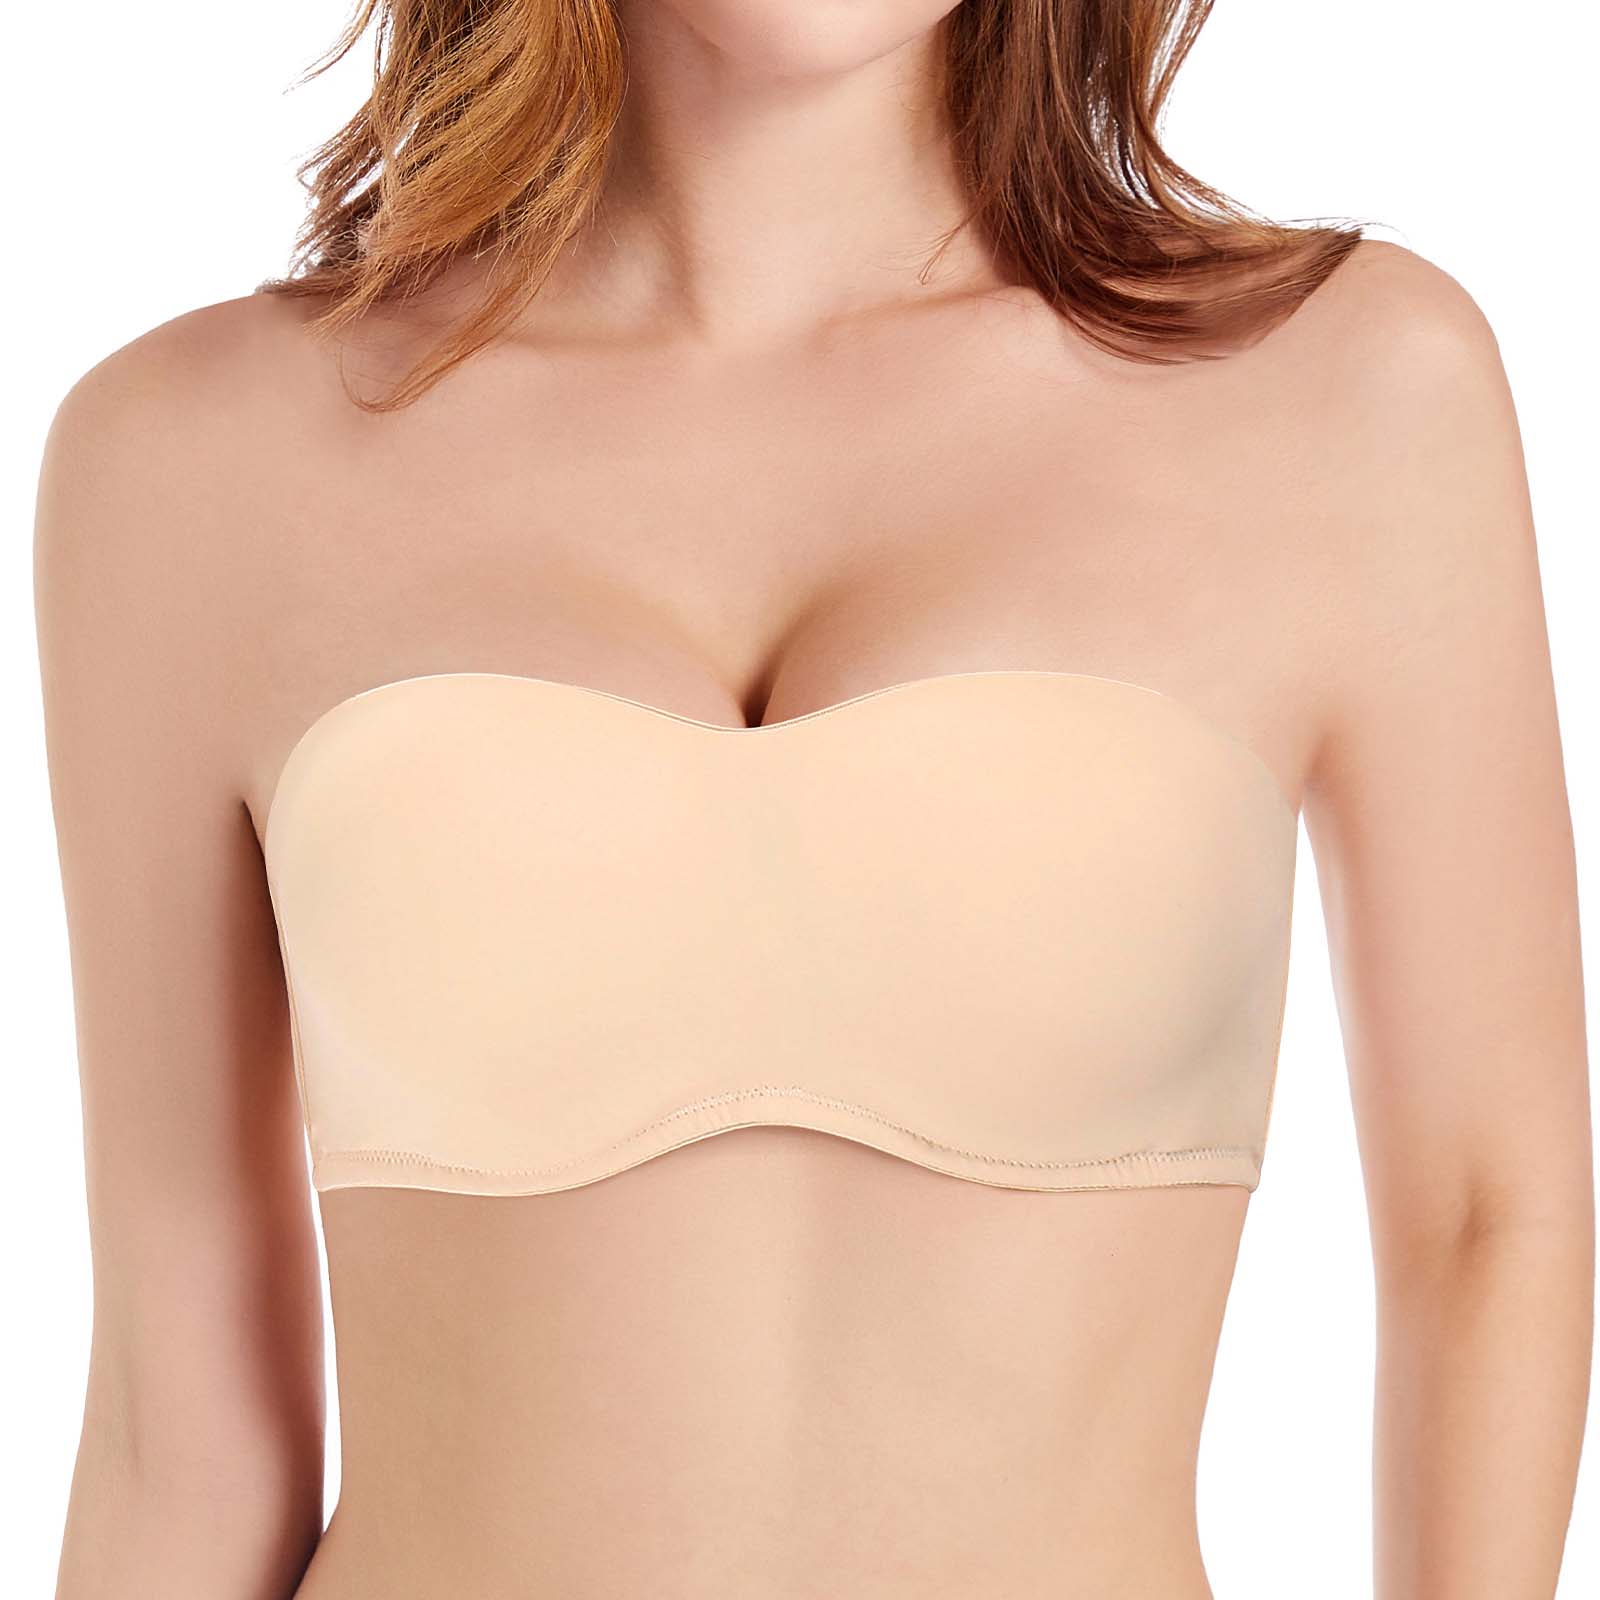  Womens Underwire Bandeau Minimizer Starpless Bras For Large  Bust Pale Nude 44B